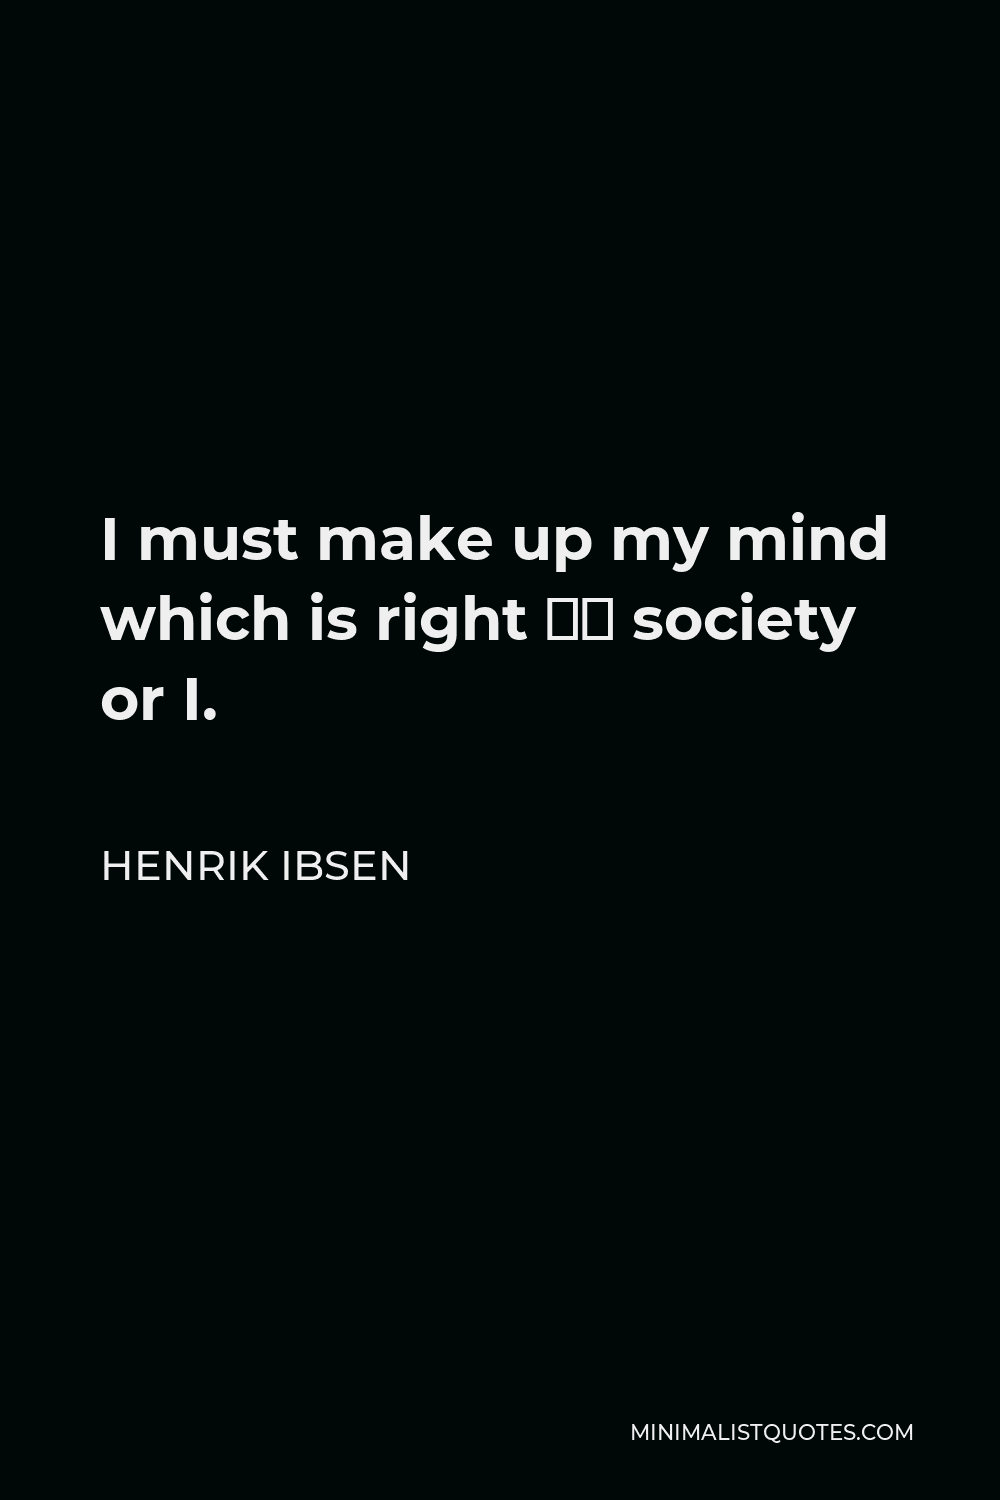 Henrik Ibsen Quote - I must make up my mind which is right – society or I.